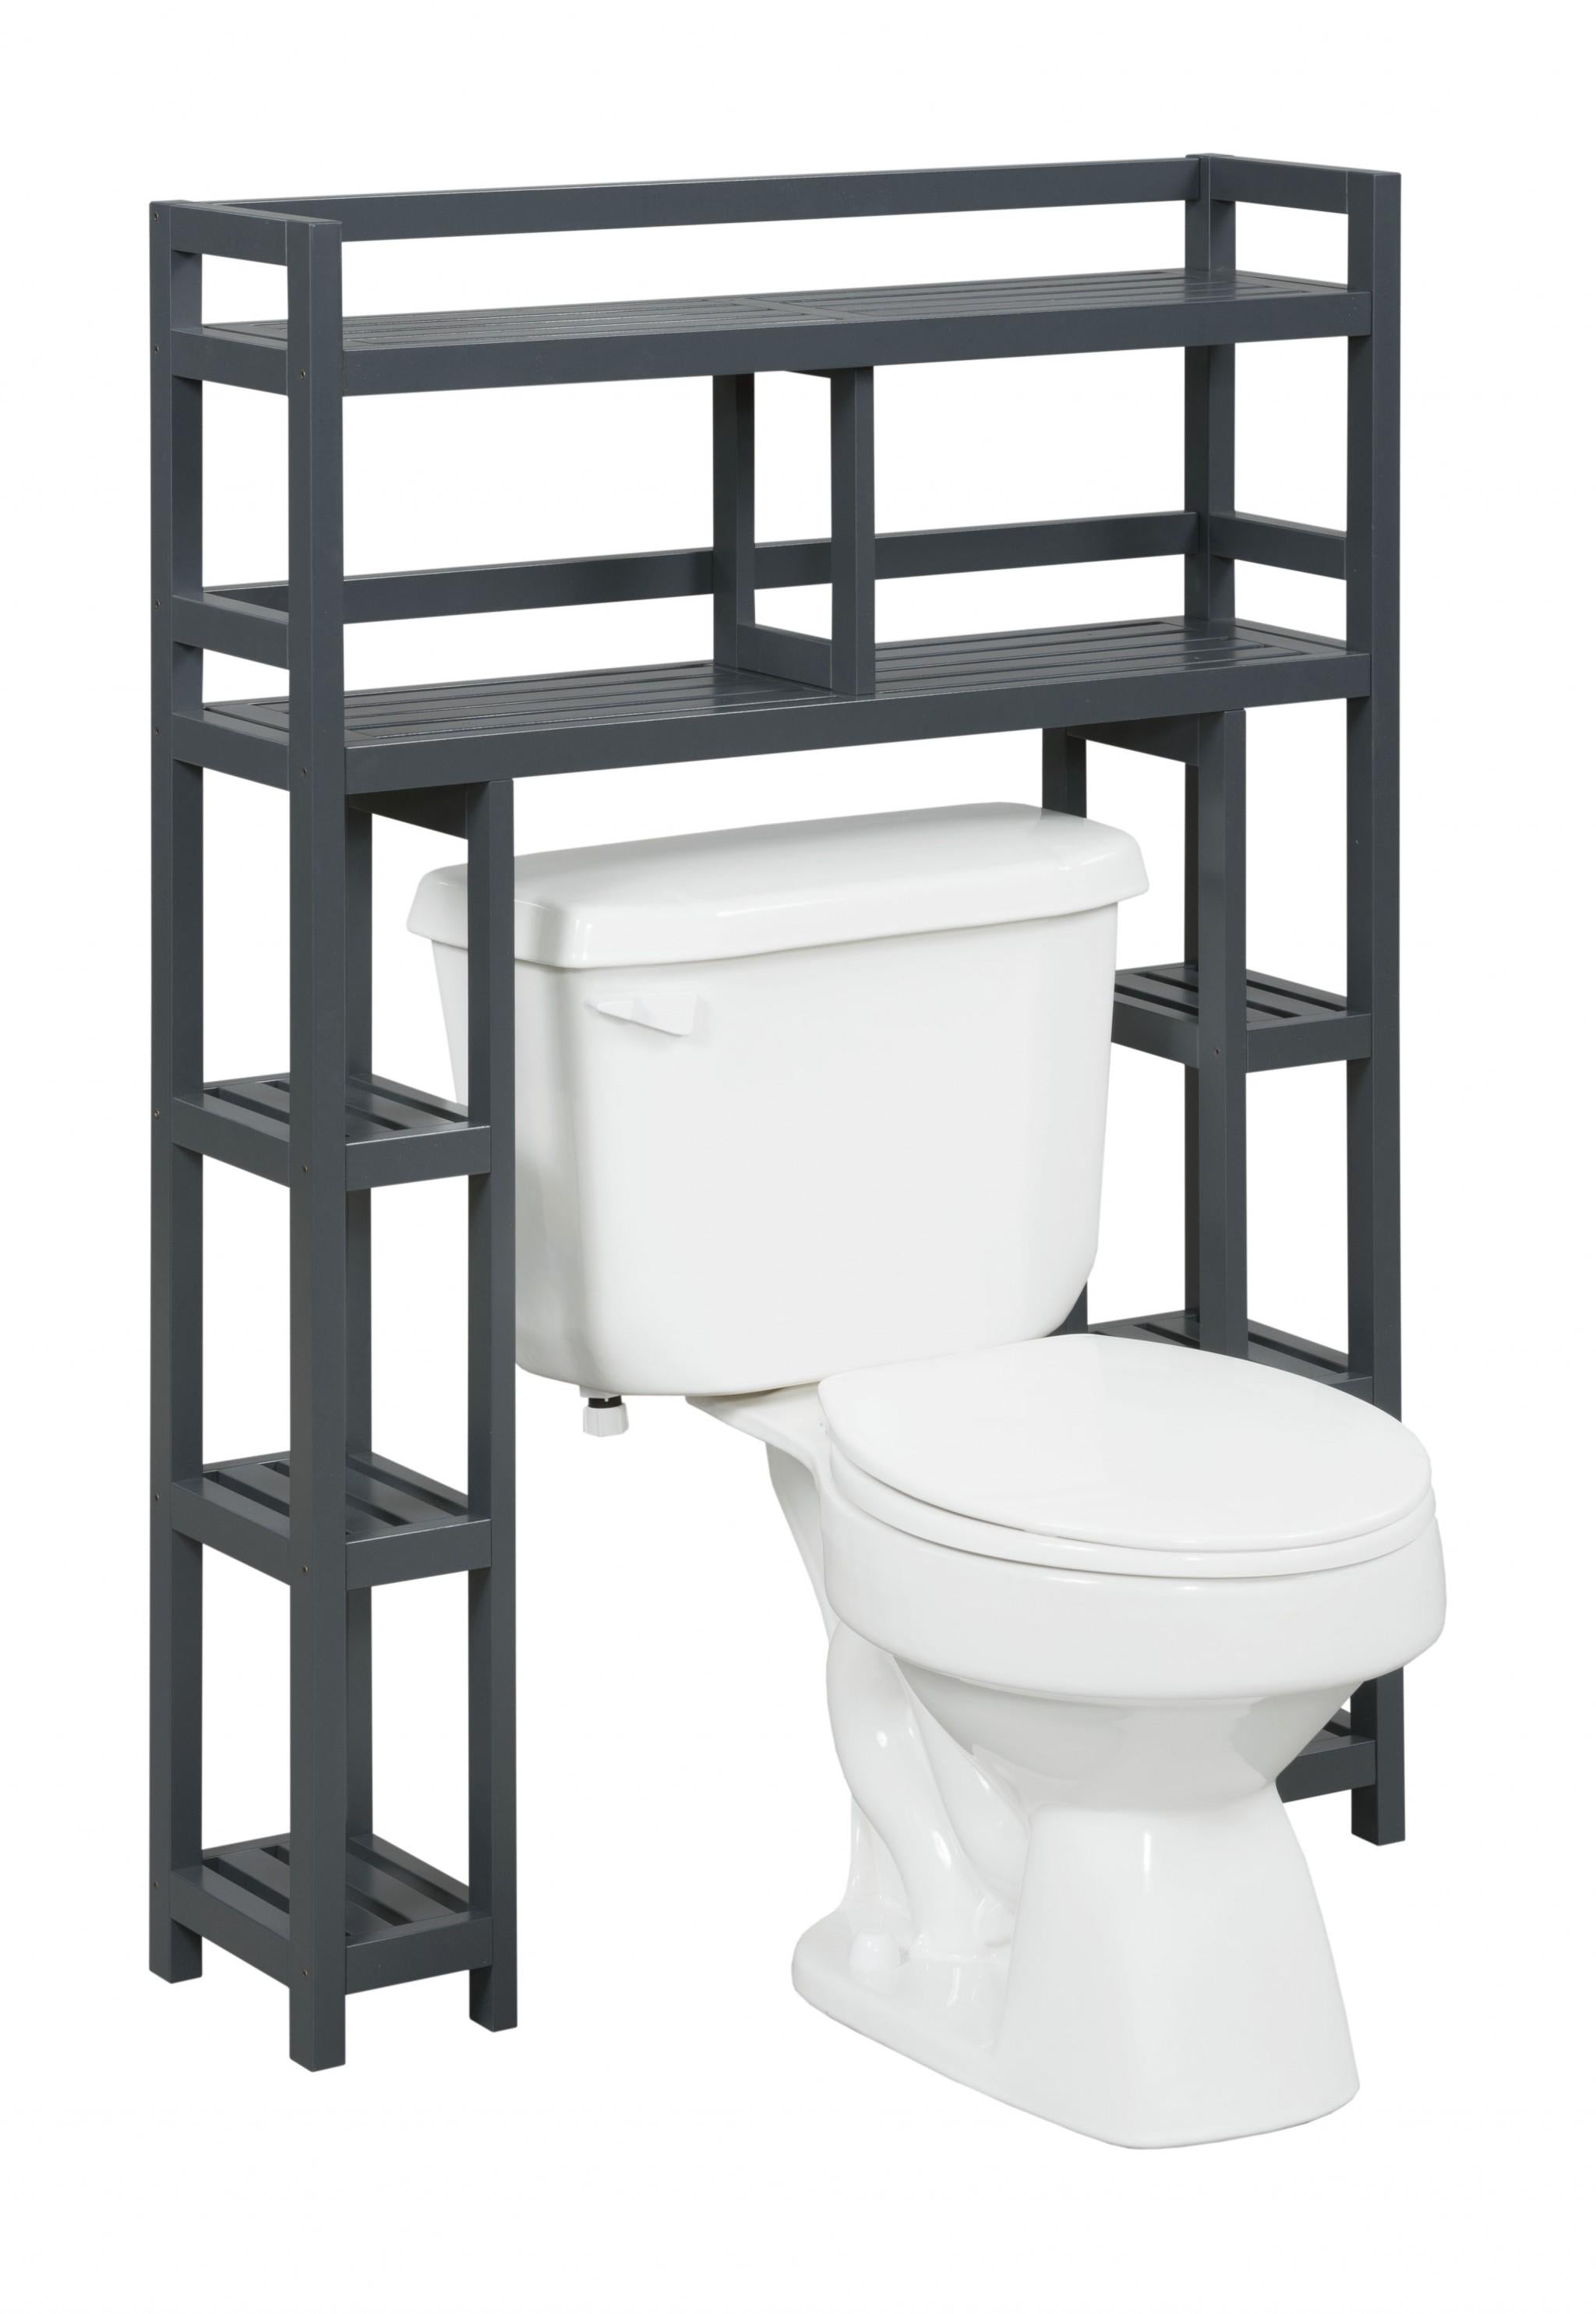 Graphite Finish 2 Tier Solid Wood Over Toilet Organizer